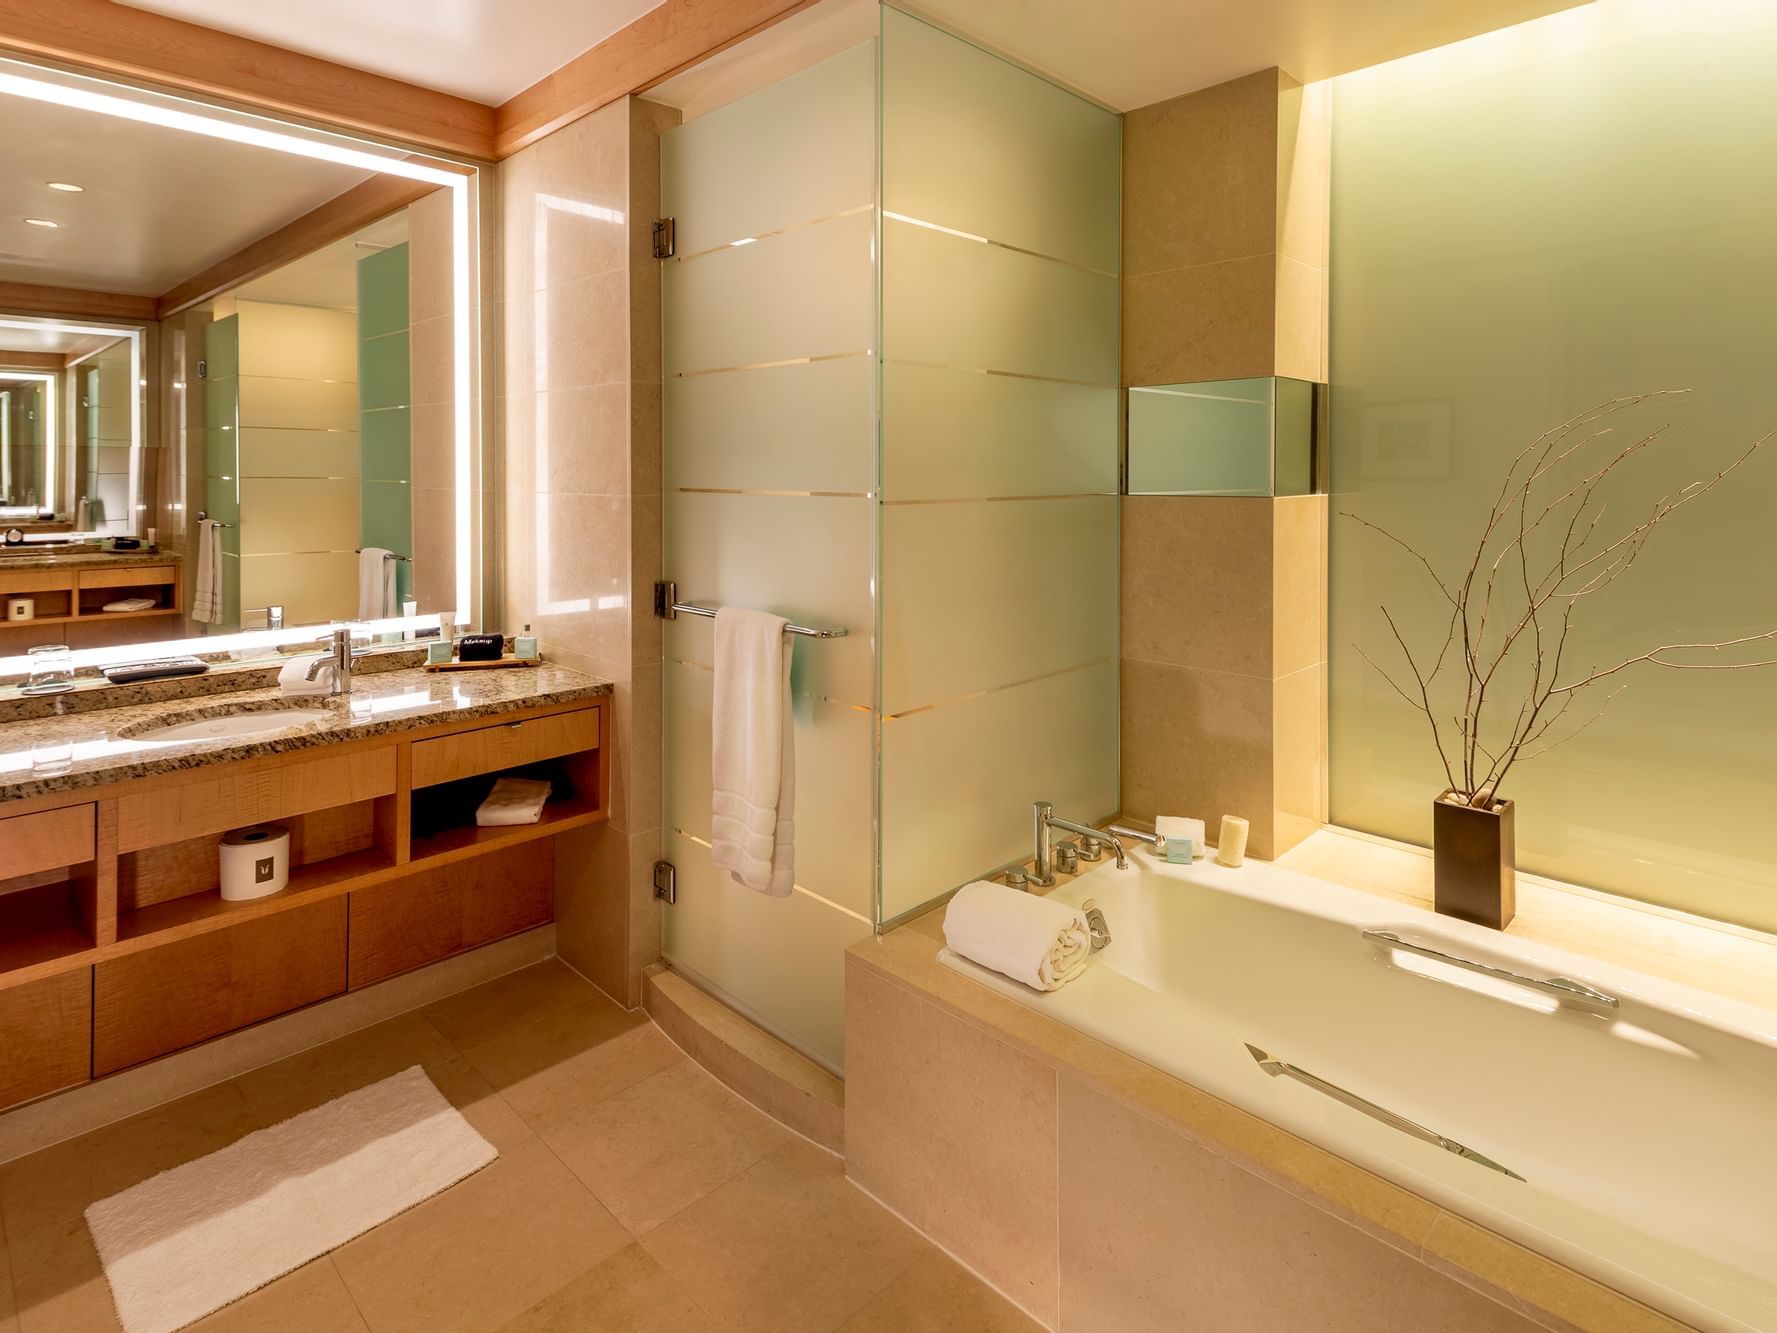 Luxury bathroom bathtub by the vanity with an illuminated mirror in Presidential Suite at The Umstead Hotel and Spa